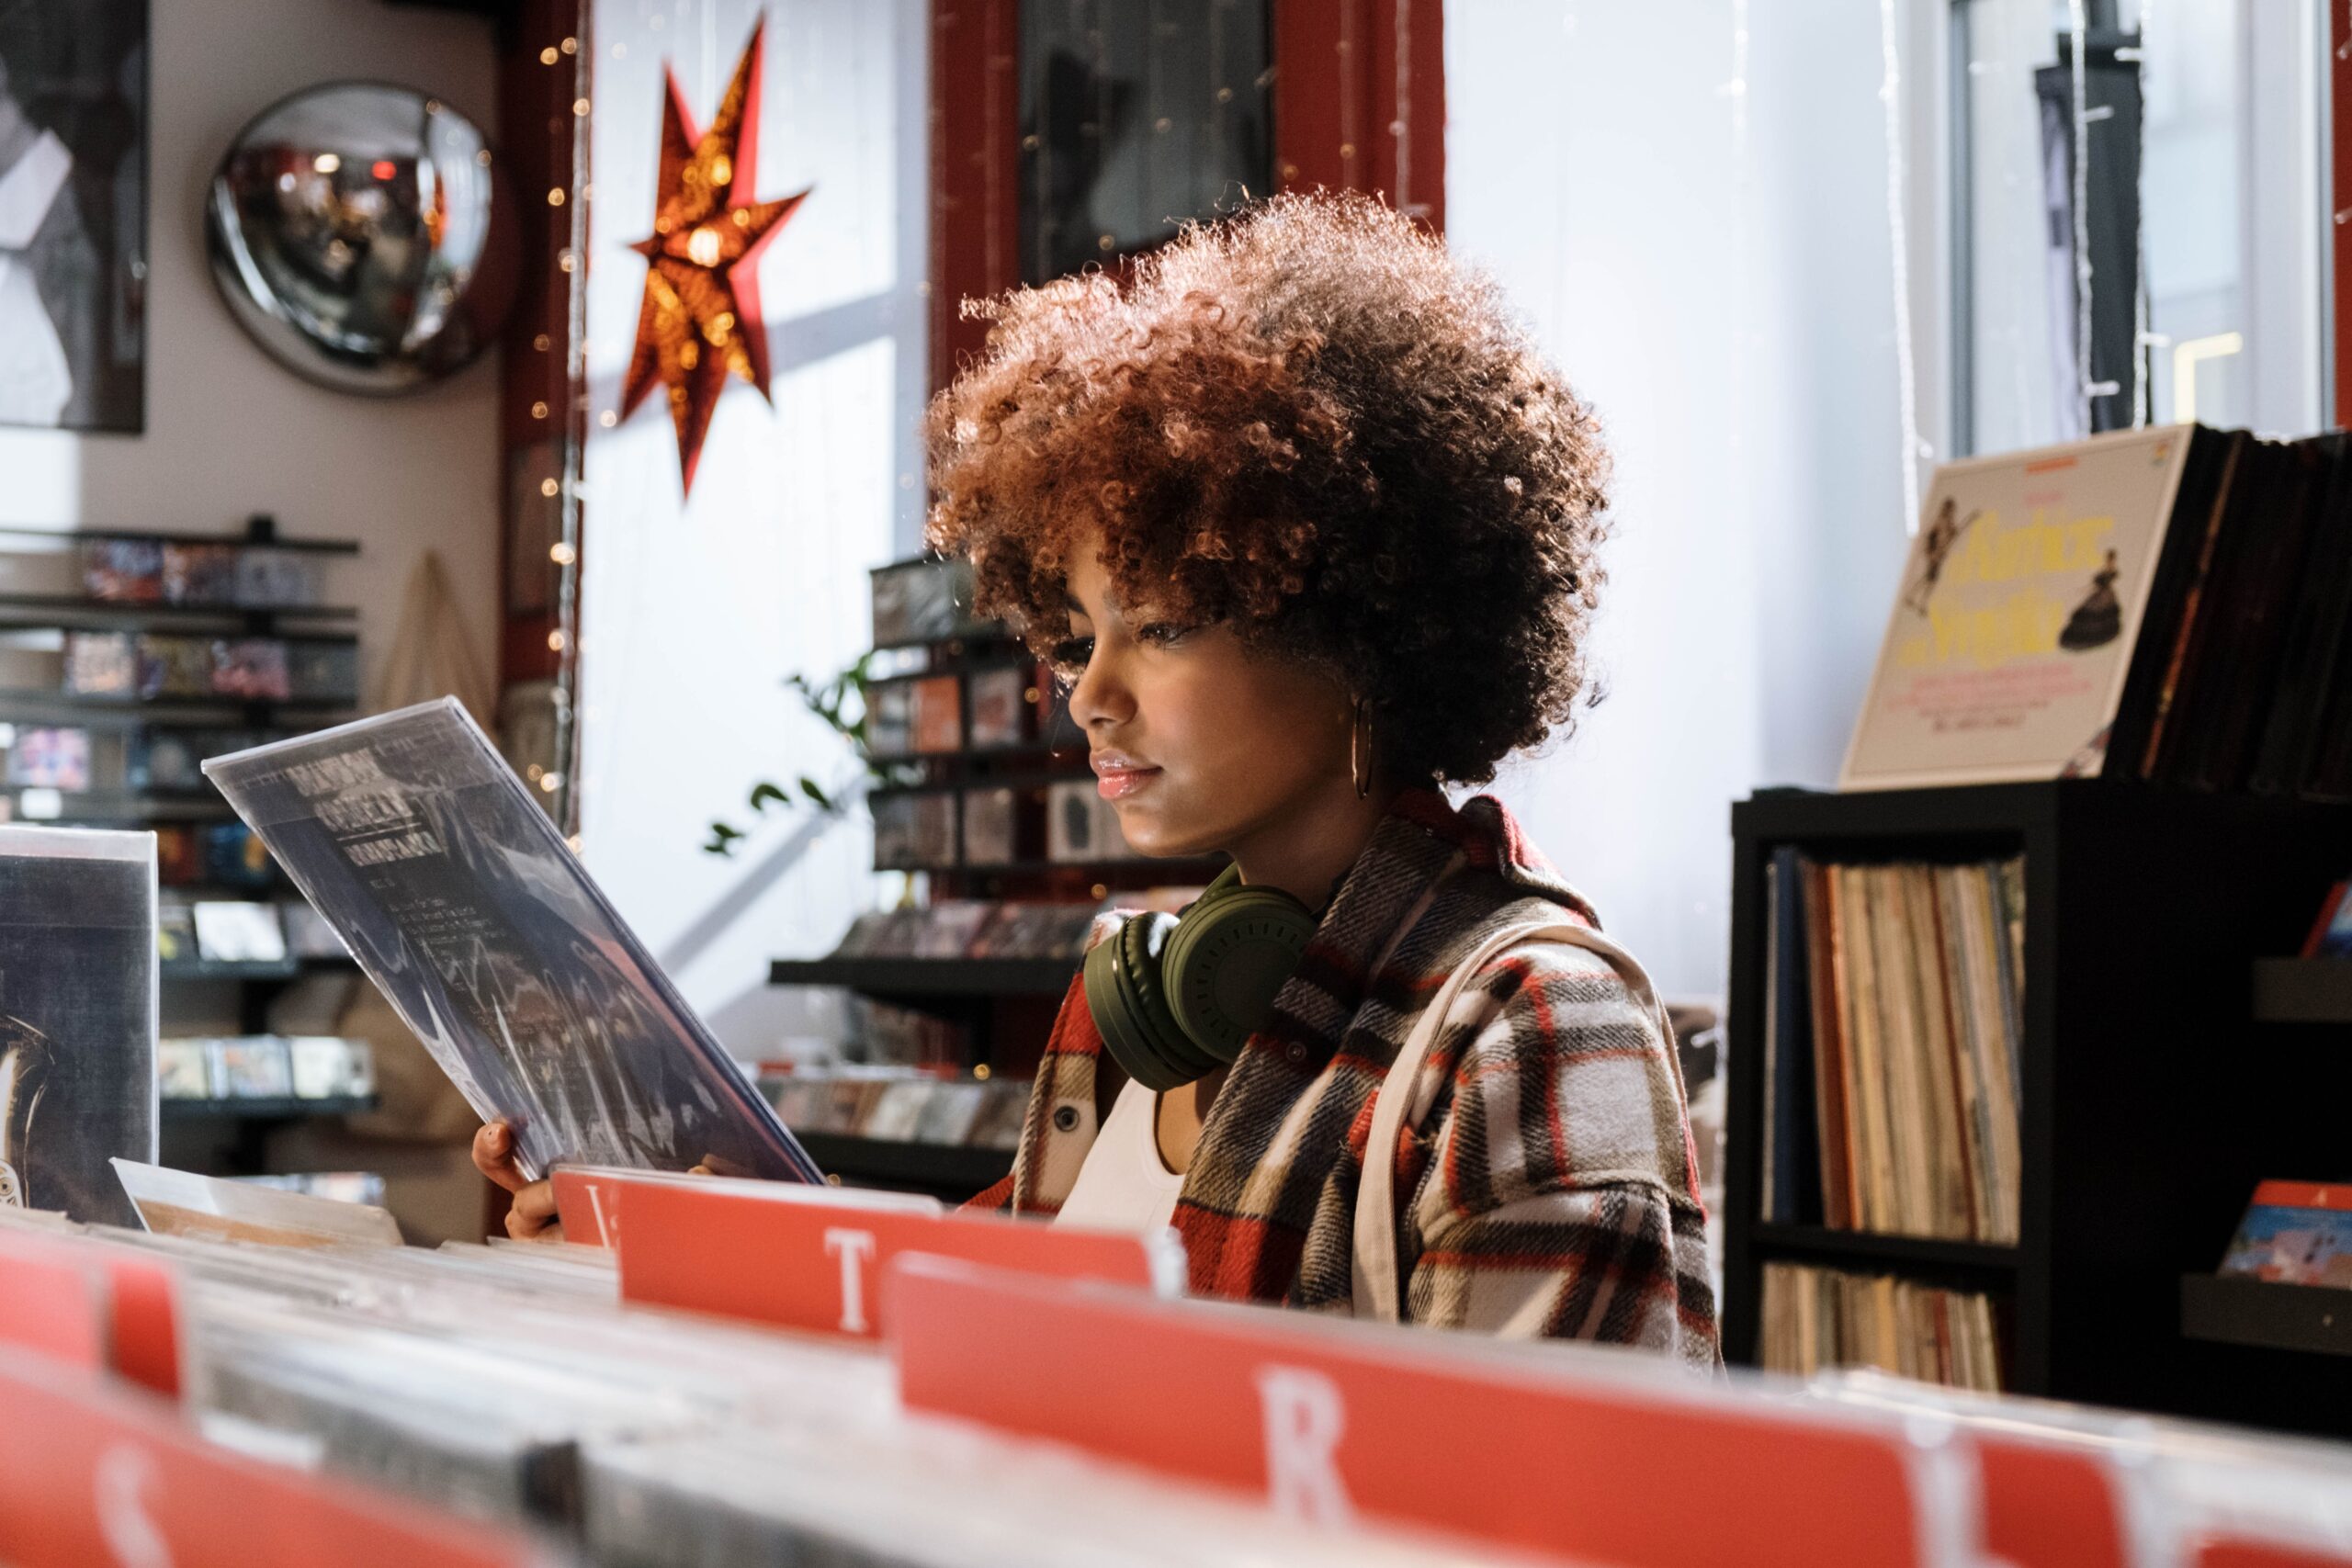 Best Types Of Vinyls To Add To Your Vinyl Record Collection - CelebMix